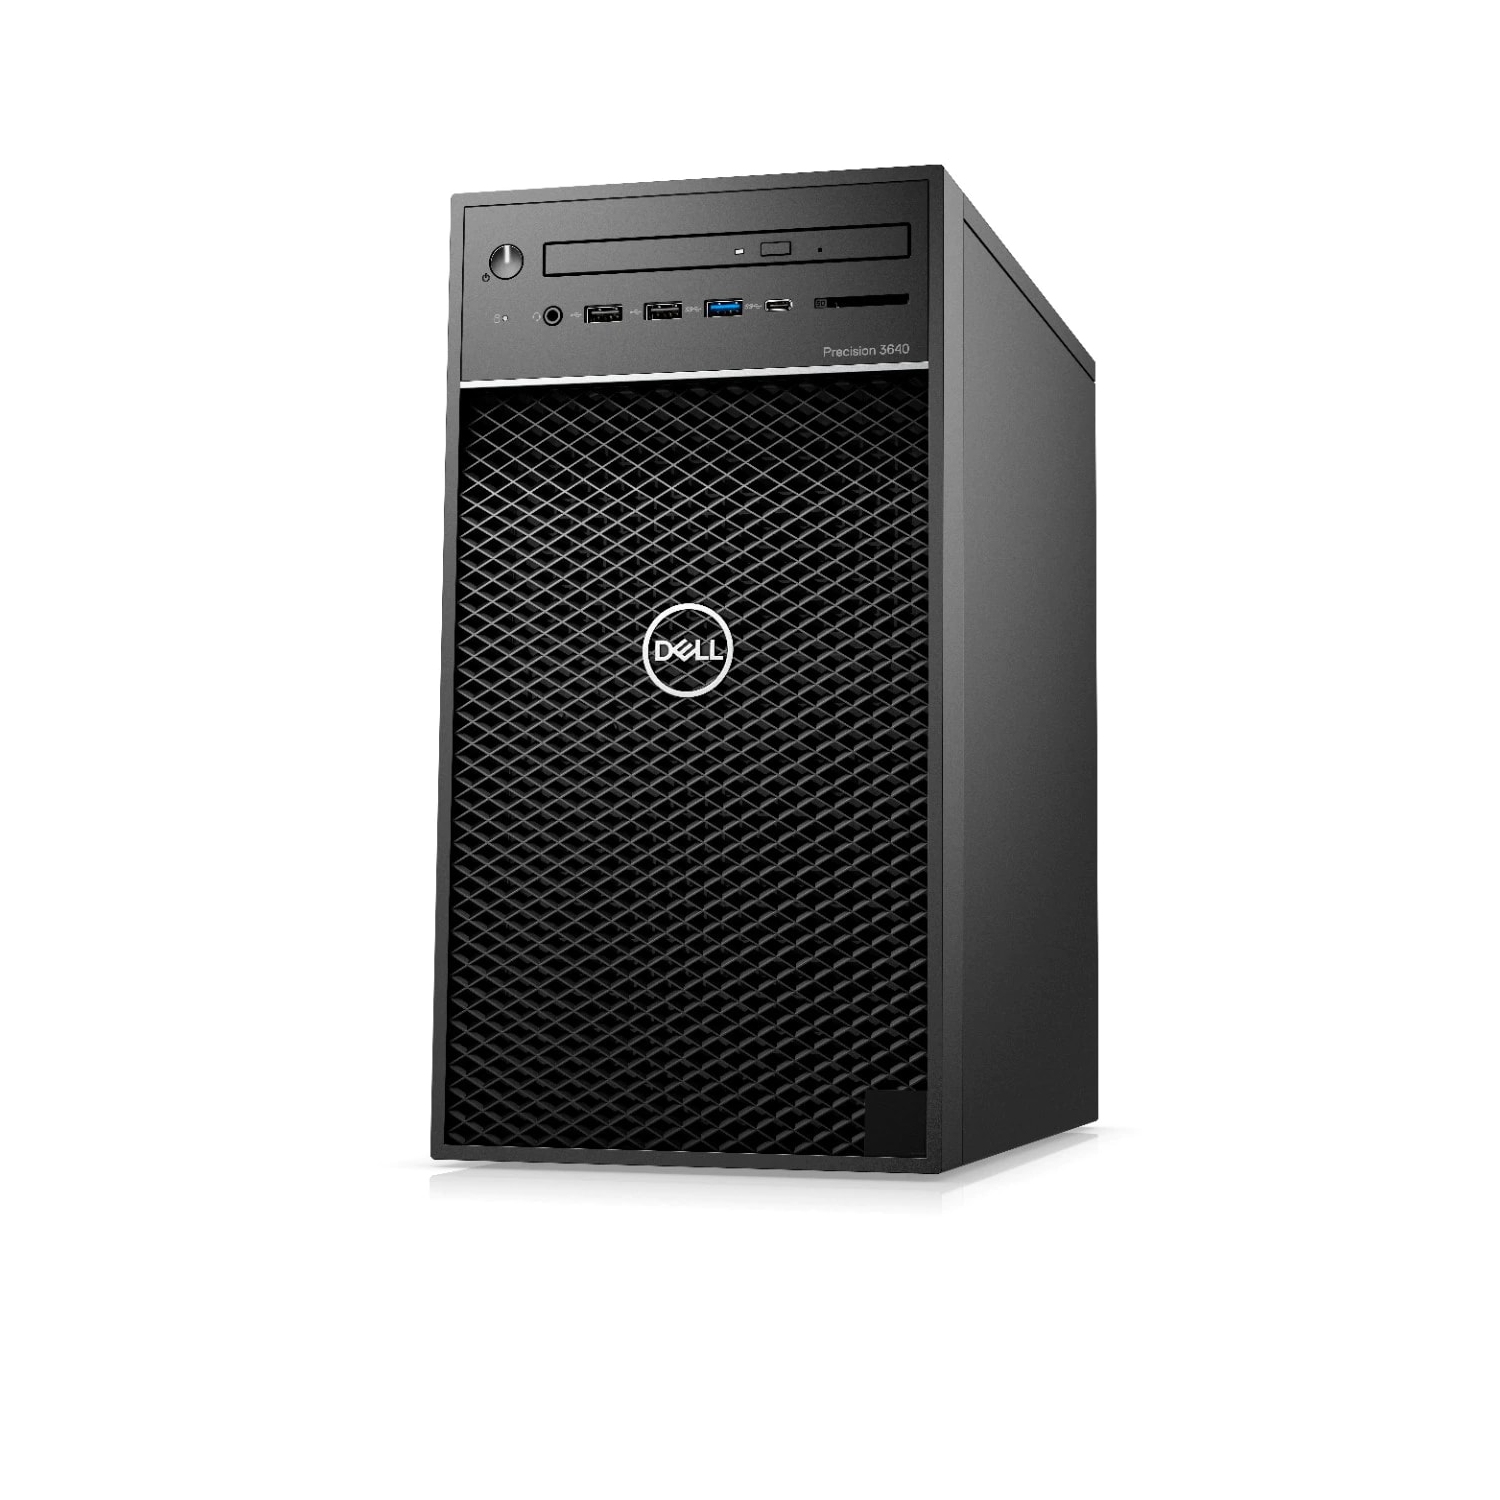 Refurbished (Excellent) - Dell Precision T3640 Workstation Desktop (2018), Core i7, 512GB SSD, 16GB RAM, RTX 4000, 8 Cores @ 4.8 GHz, 10th Gen CPU Certified Refurbished